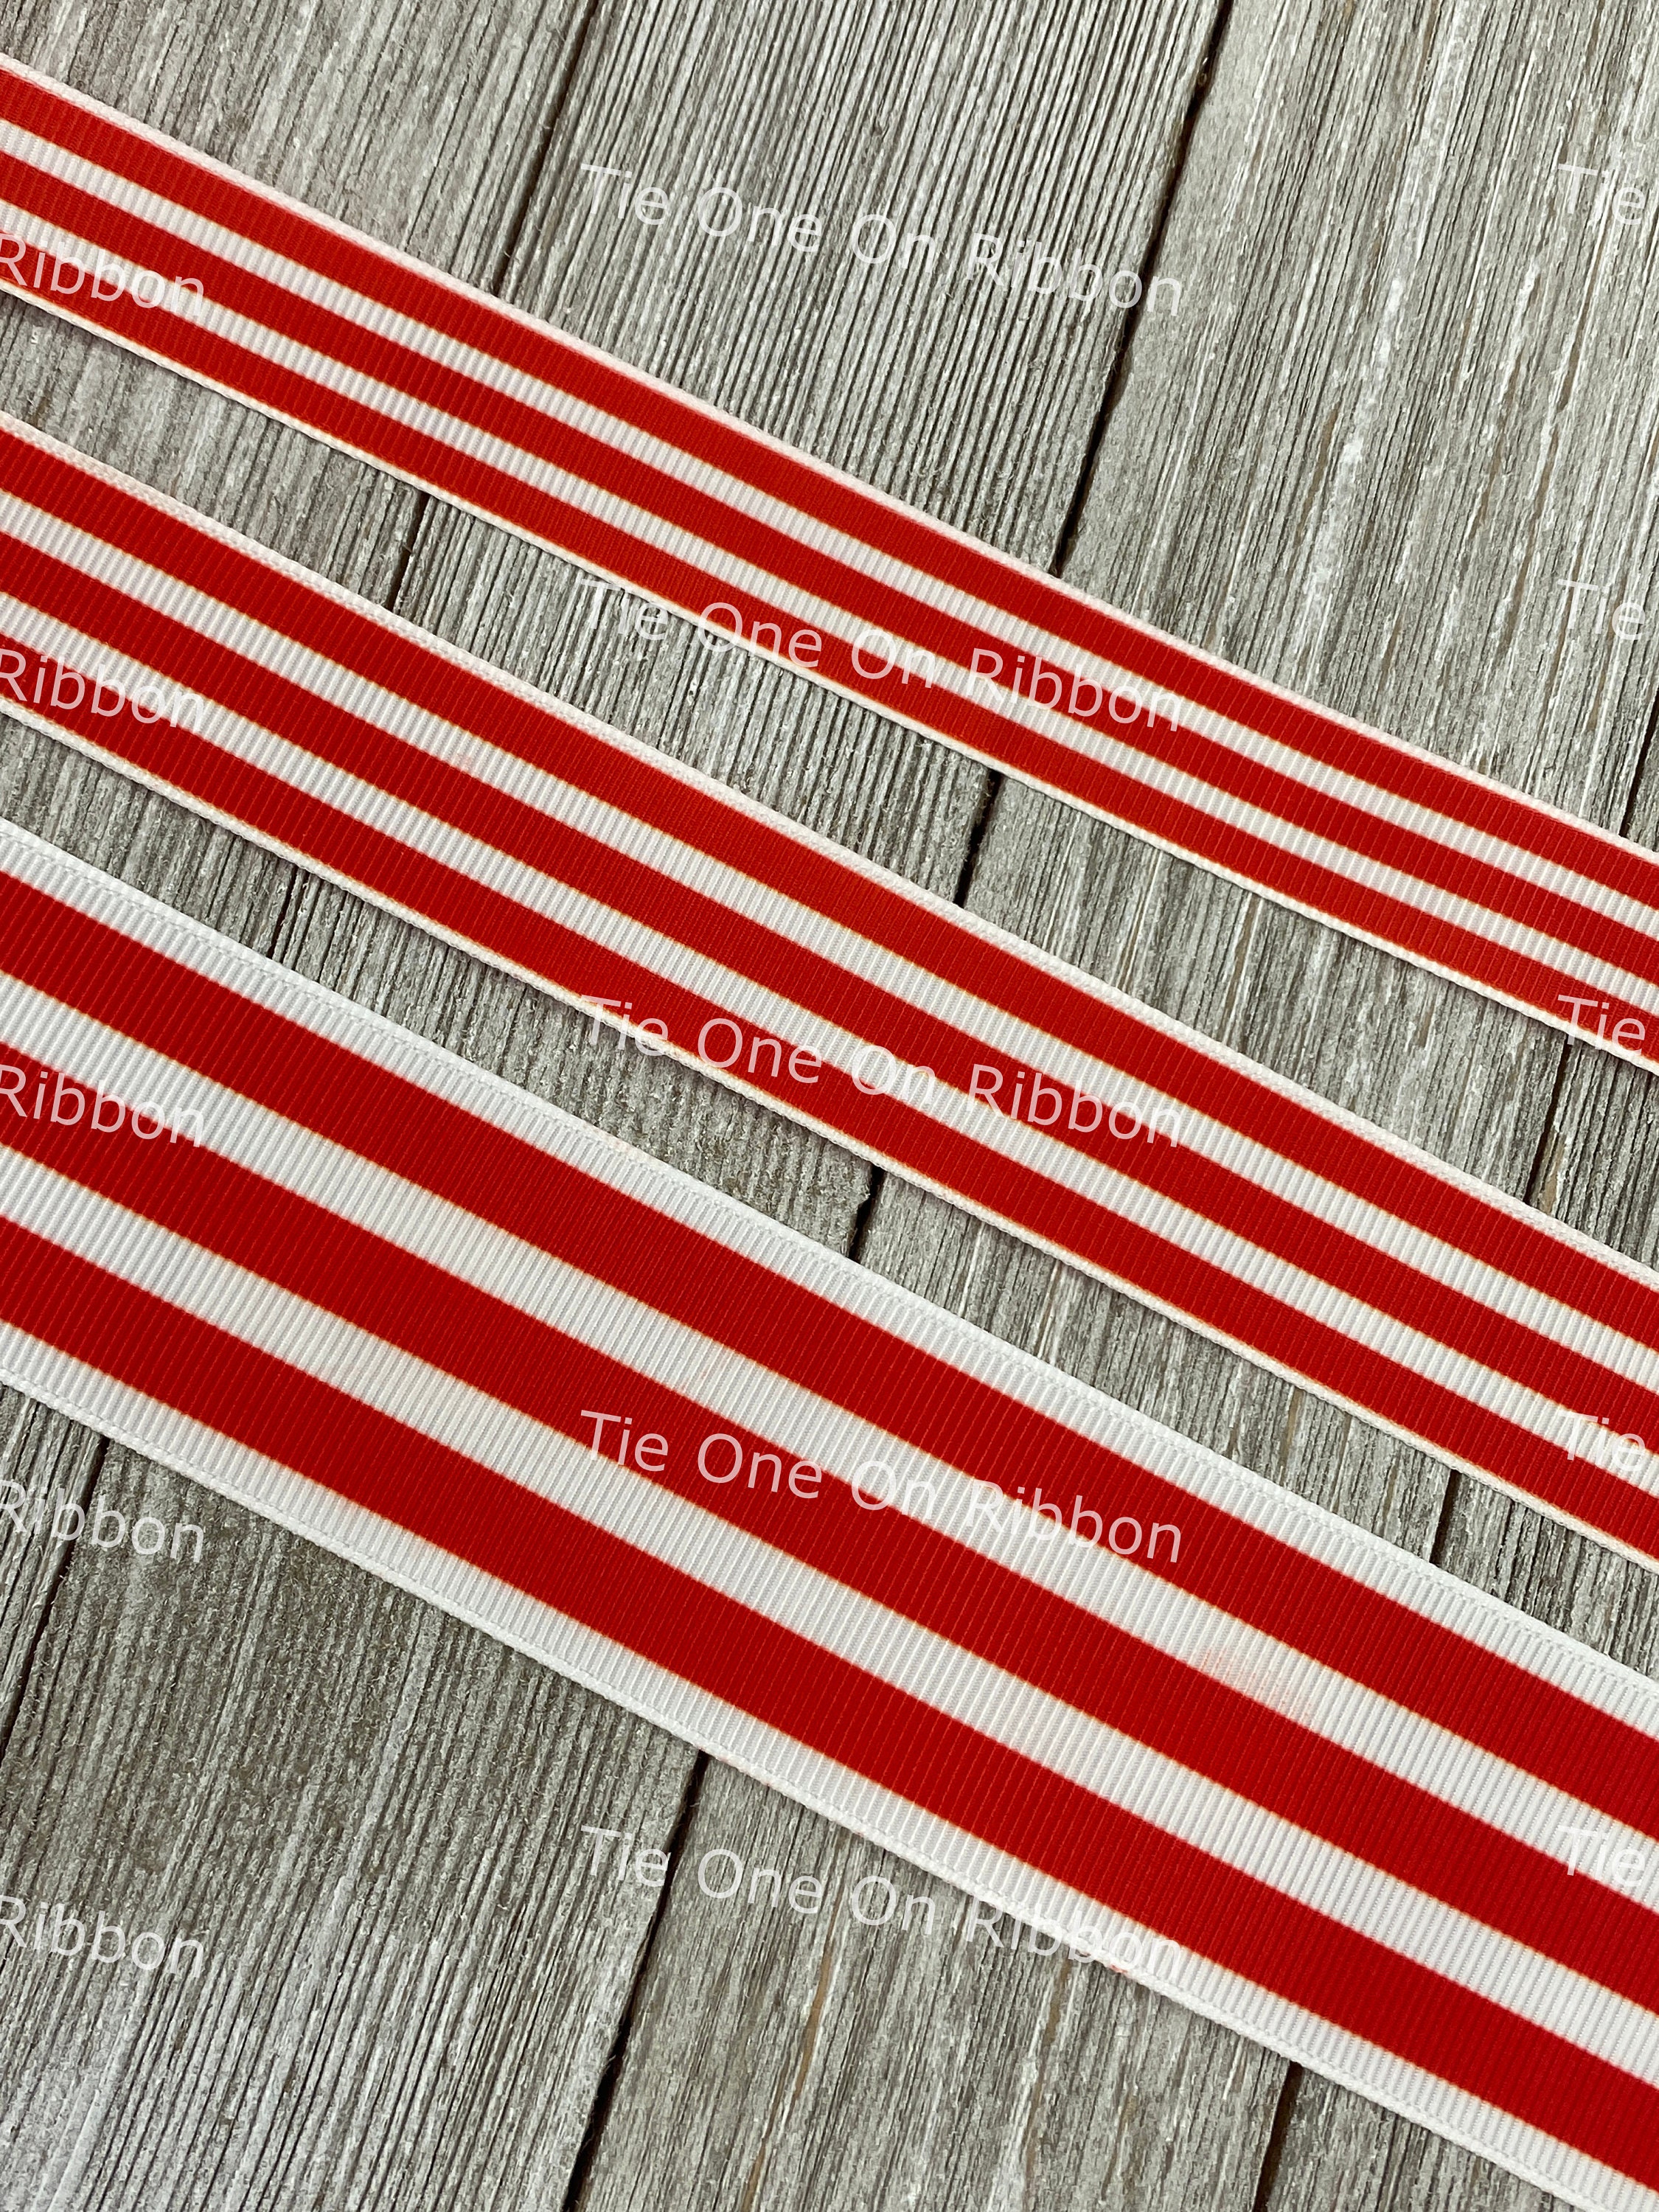 Patriotic stripe ribbon red, white and blue printed on 7/8 satin